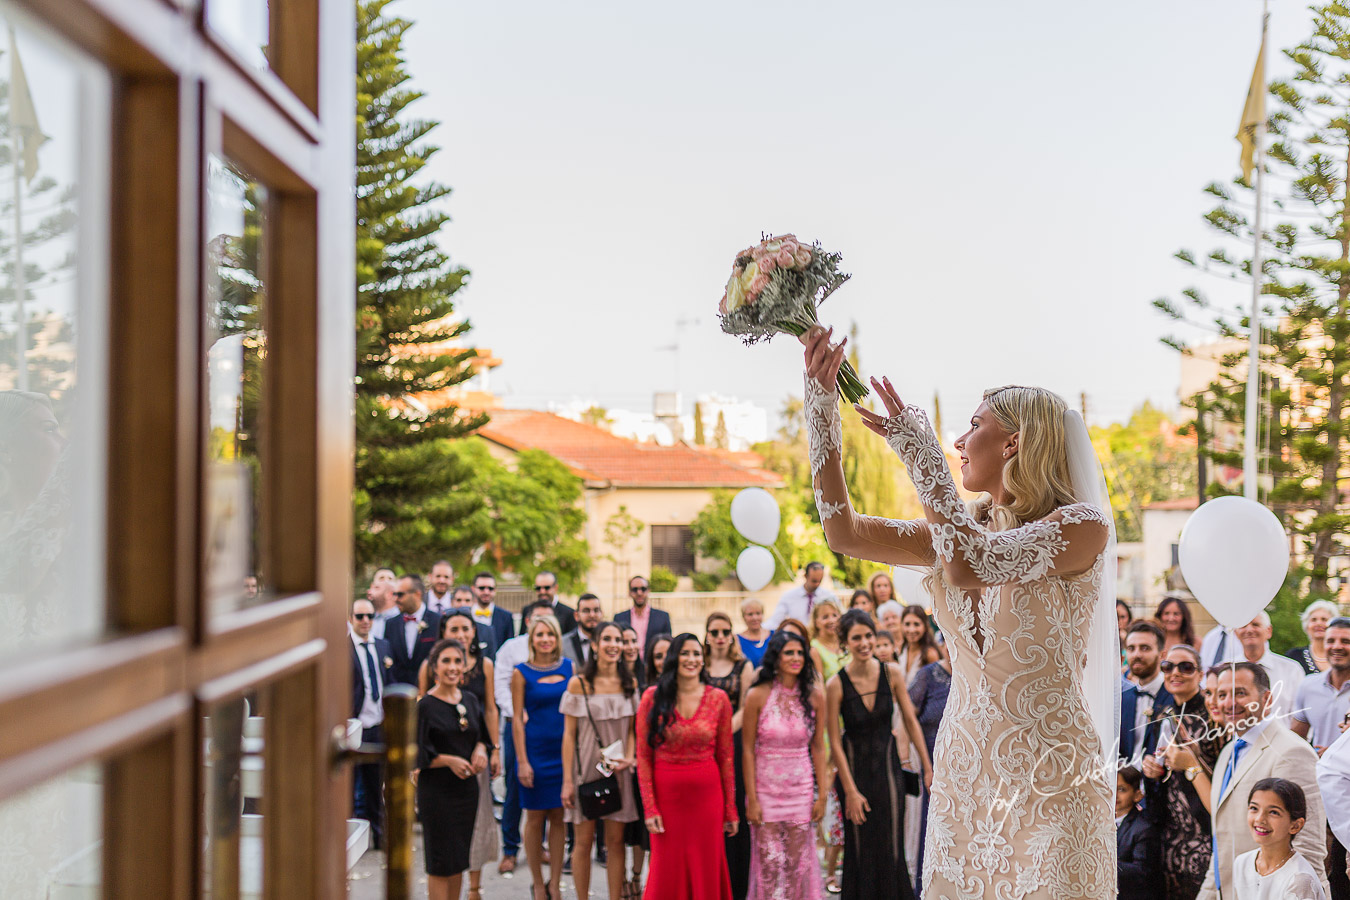 Immediate moments after the church ceremony captured at an elegant and romantic wedding at Elias Beach Hotel by Cristian Dascalu.